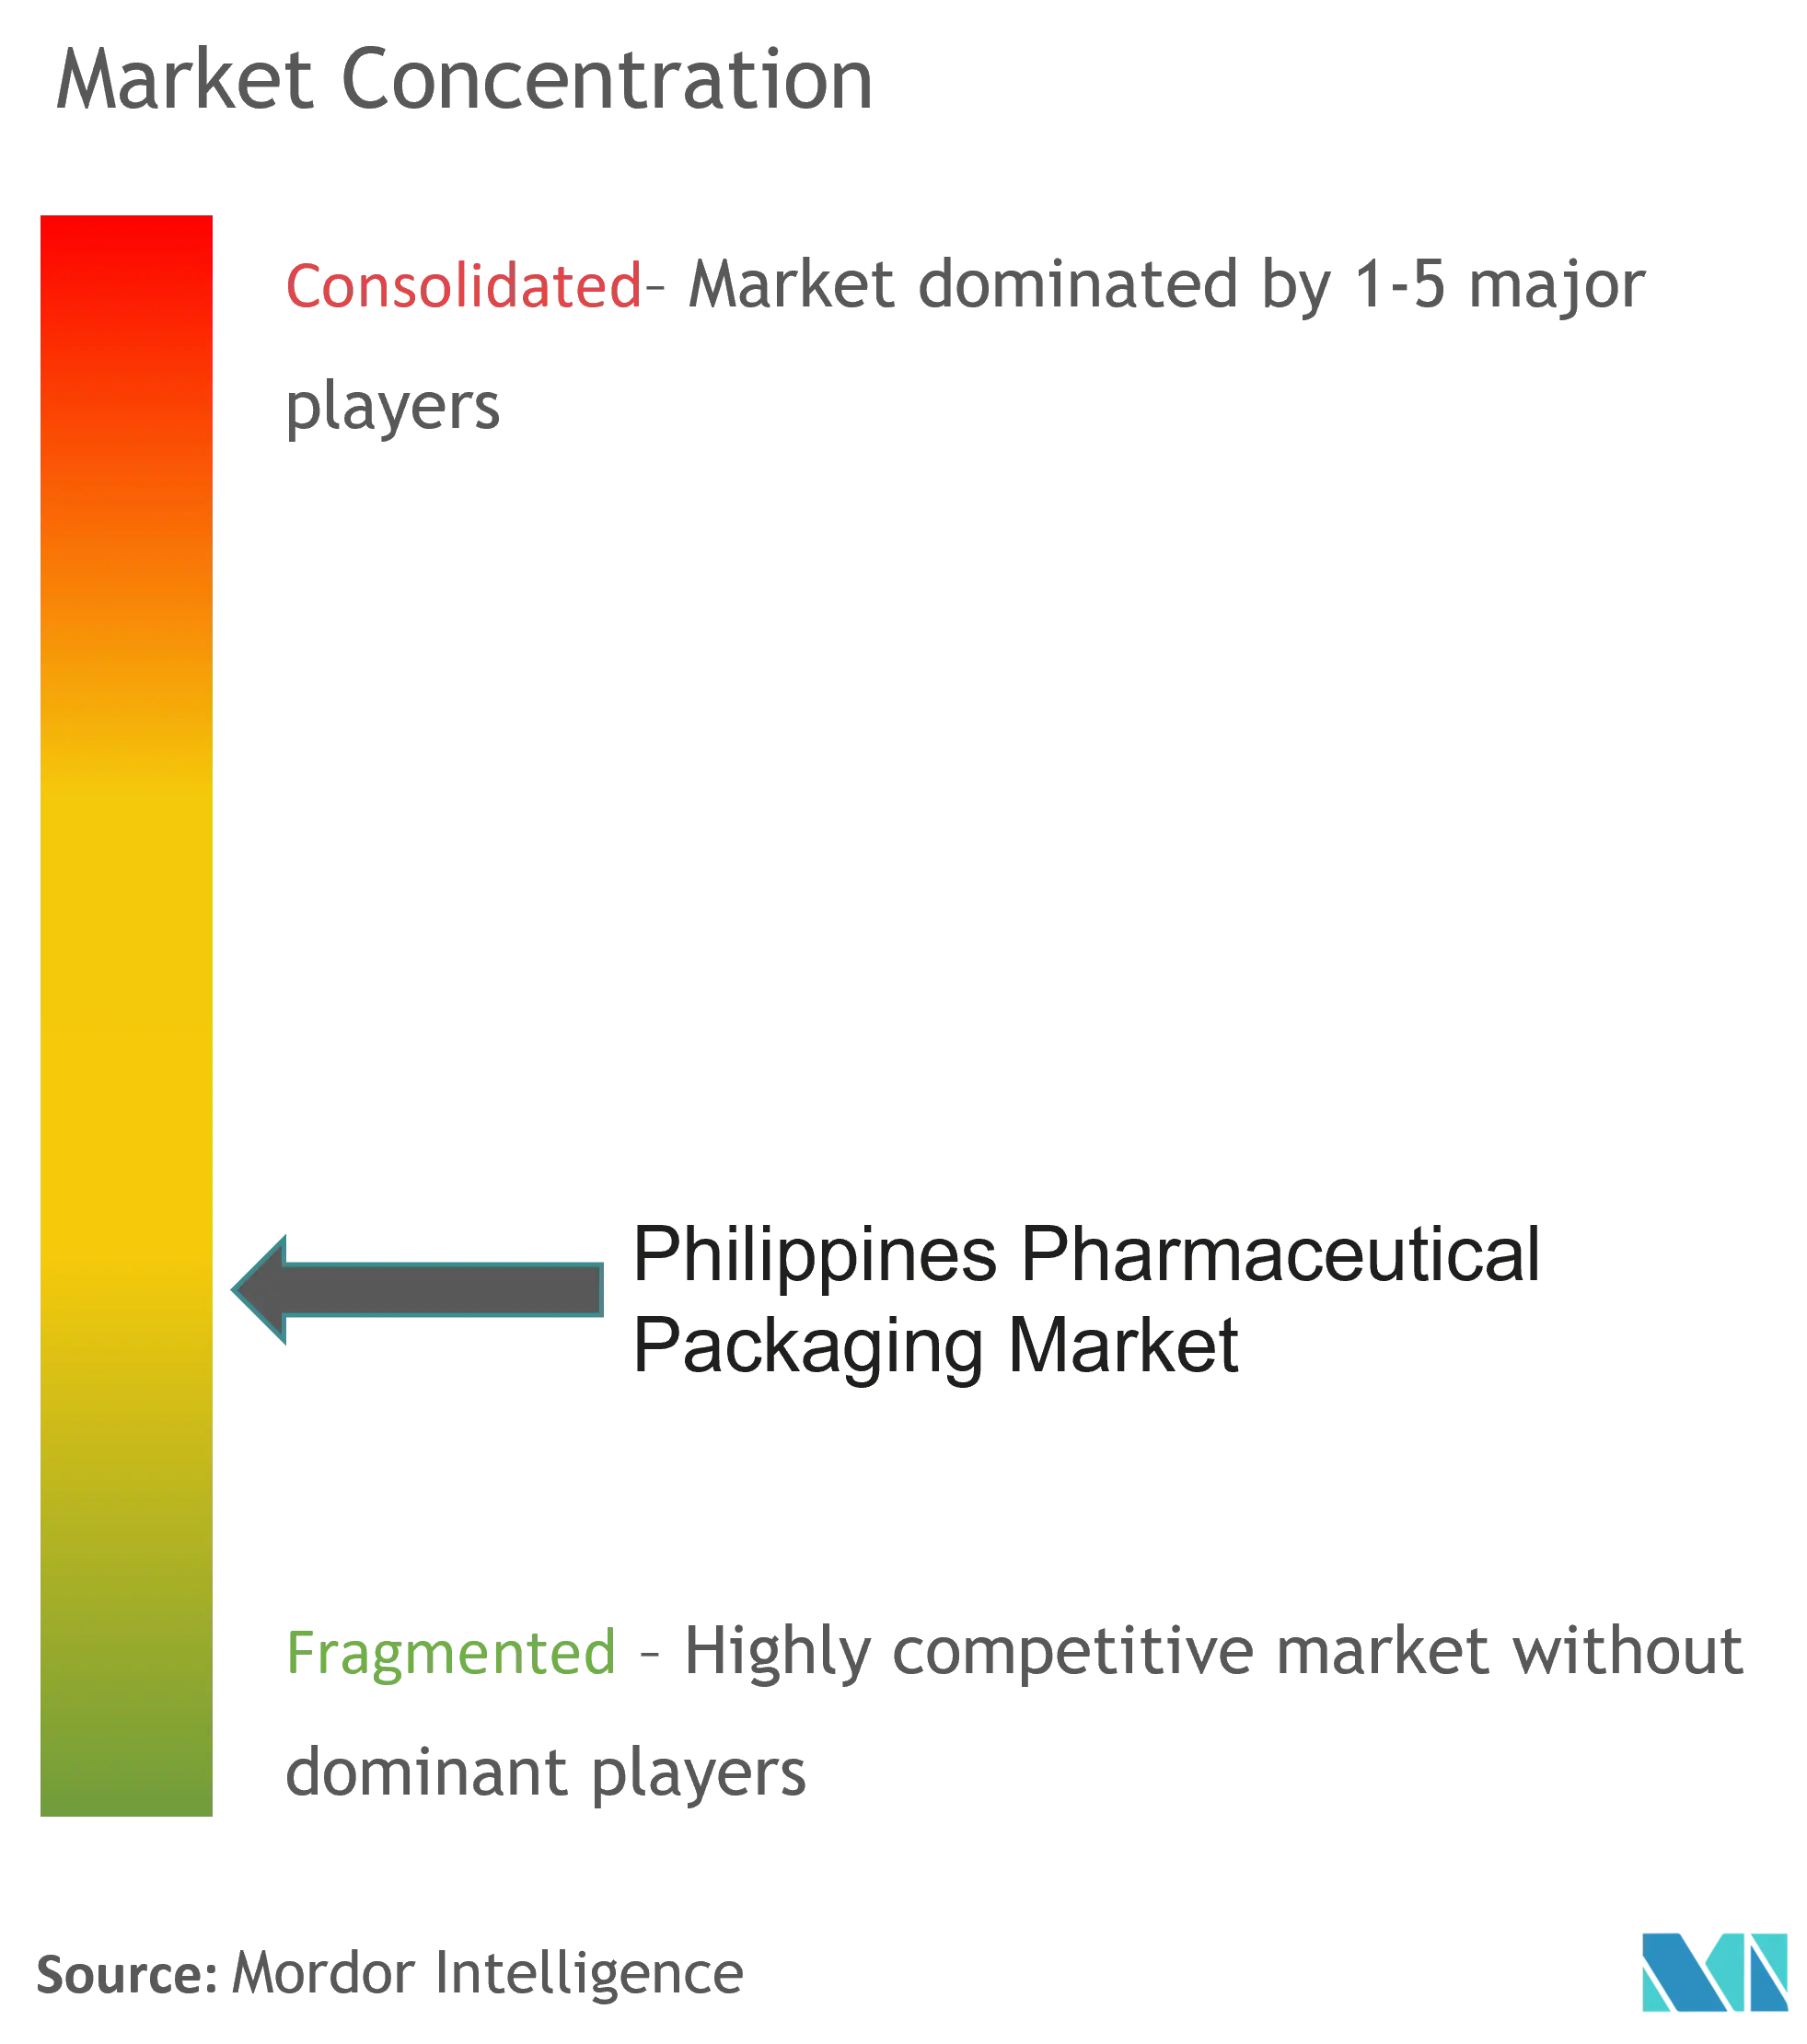 Philippines Pharmaceutical Packaging Market - Market Concentration.png